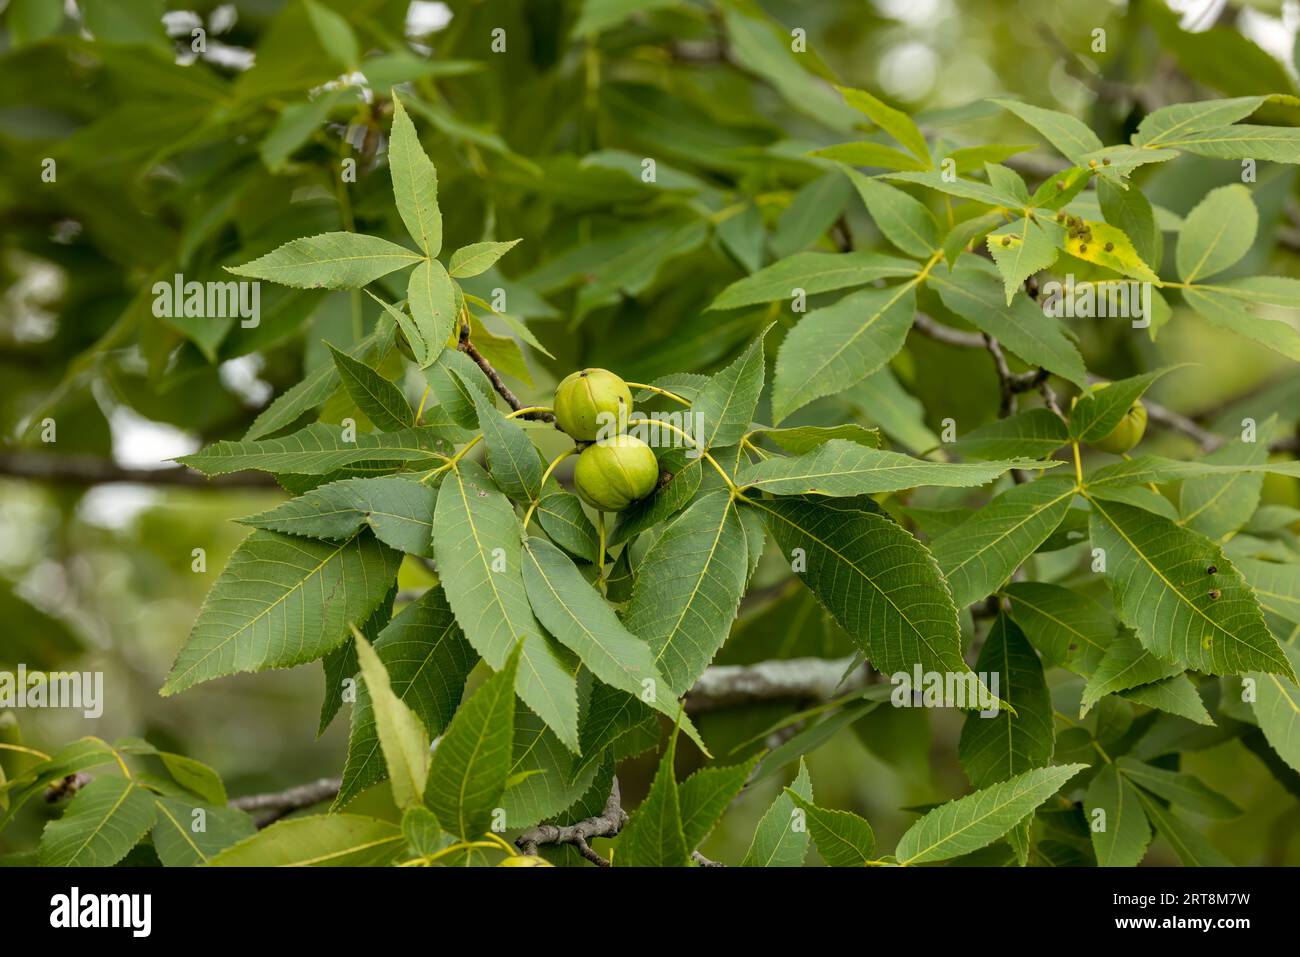 The  White walnut (Juglans cinerea), commonly known as butternut , is a species of walnut native to the eastern United States and southeast Canada. Stock Photo